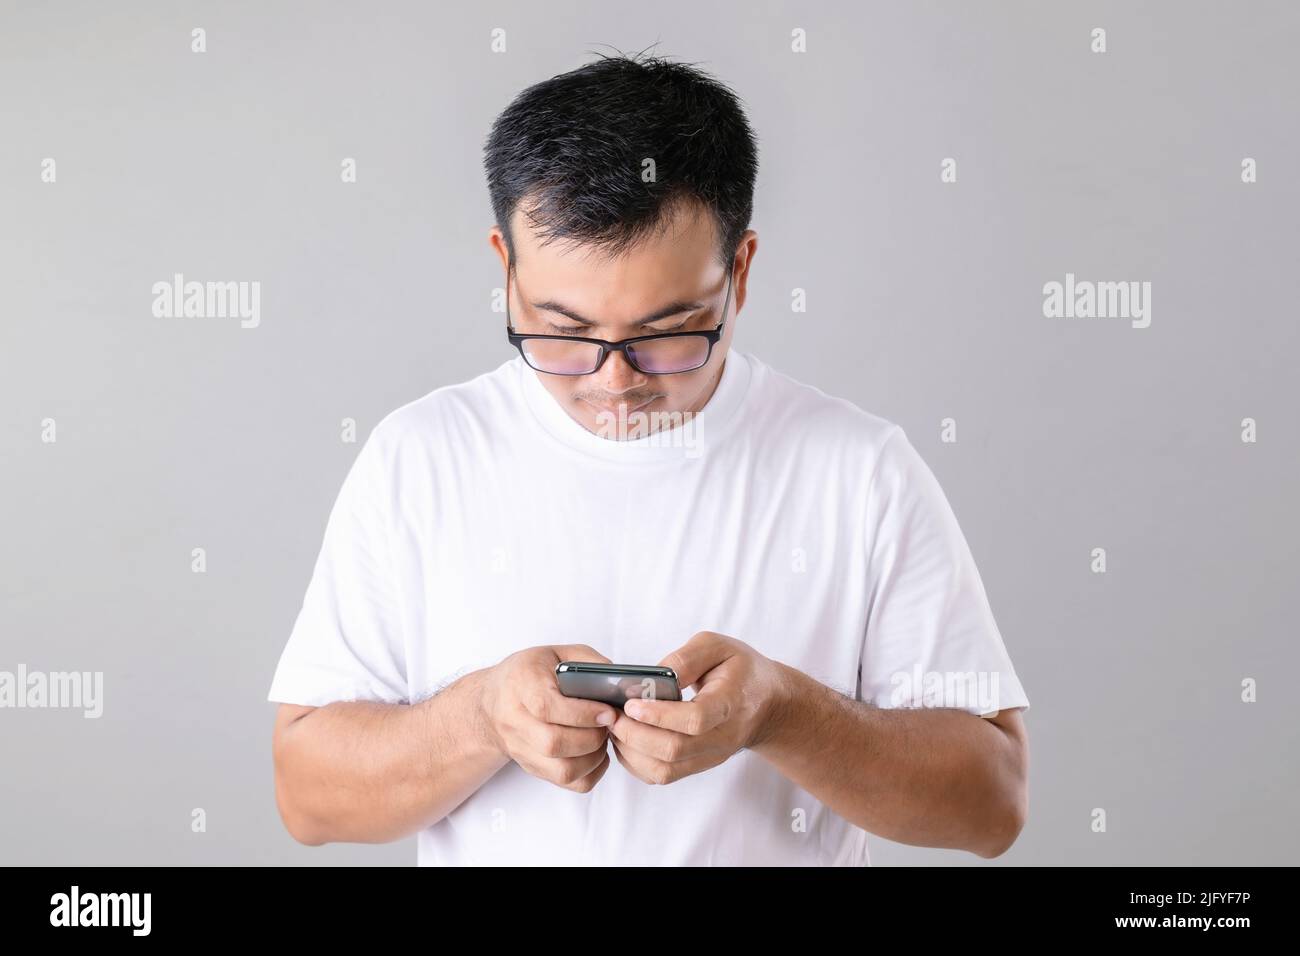 Asian man typing or chatting on smartphone studio shot on grey background Stock Photo